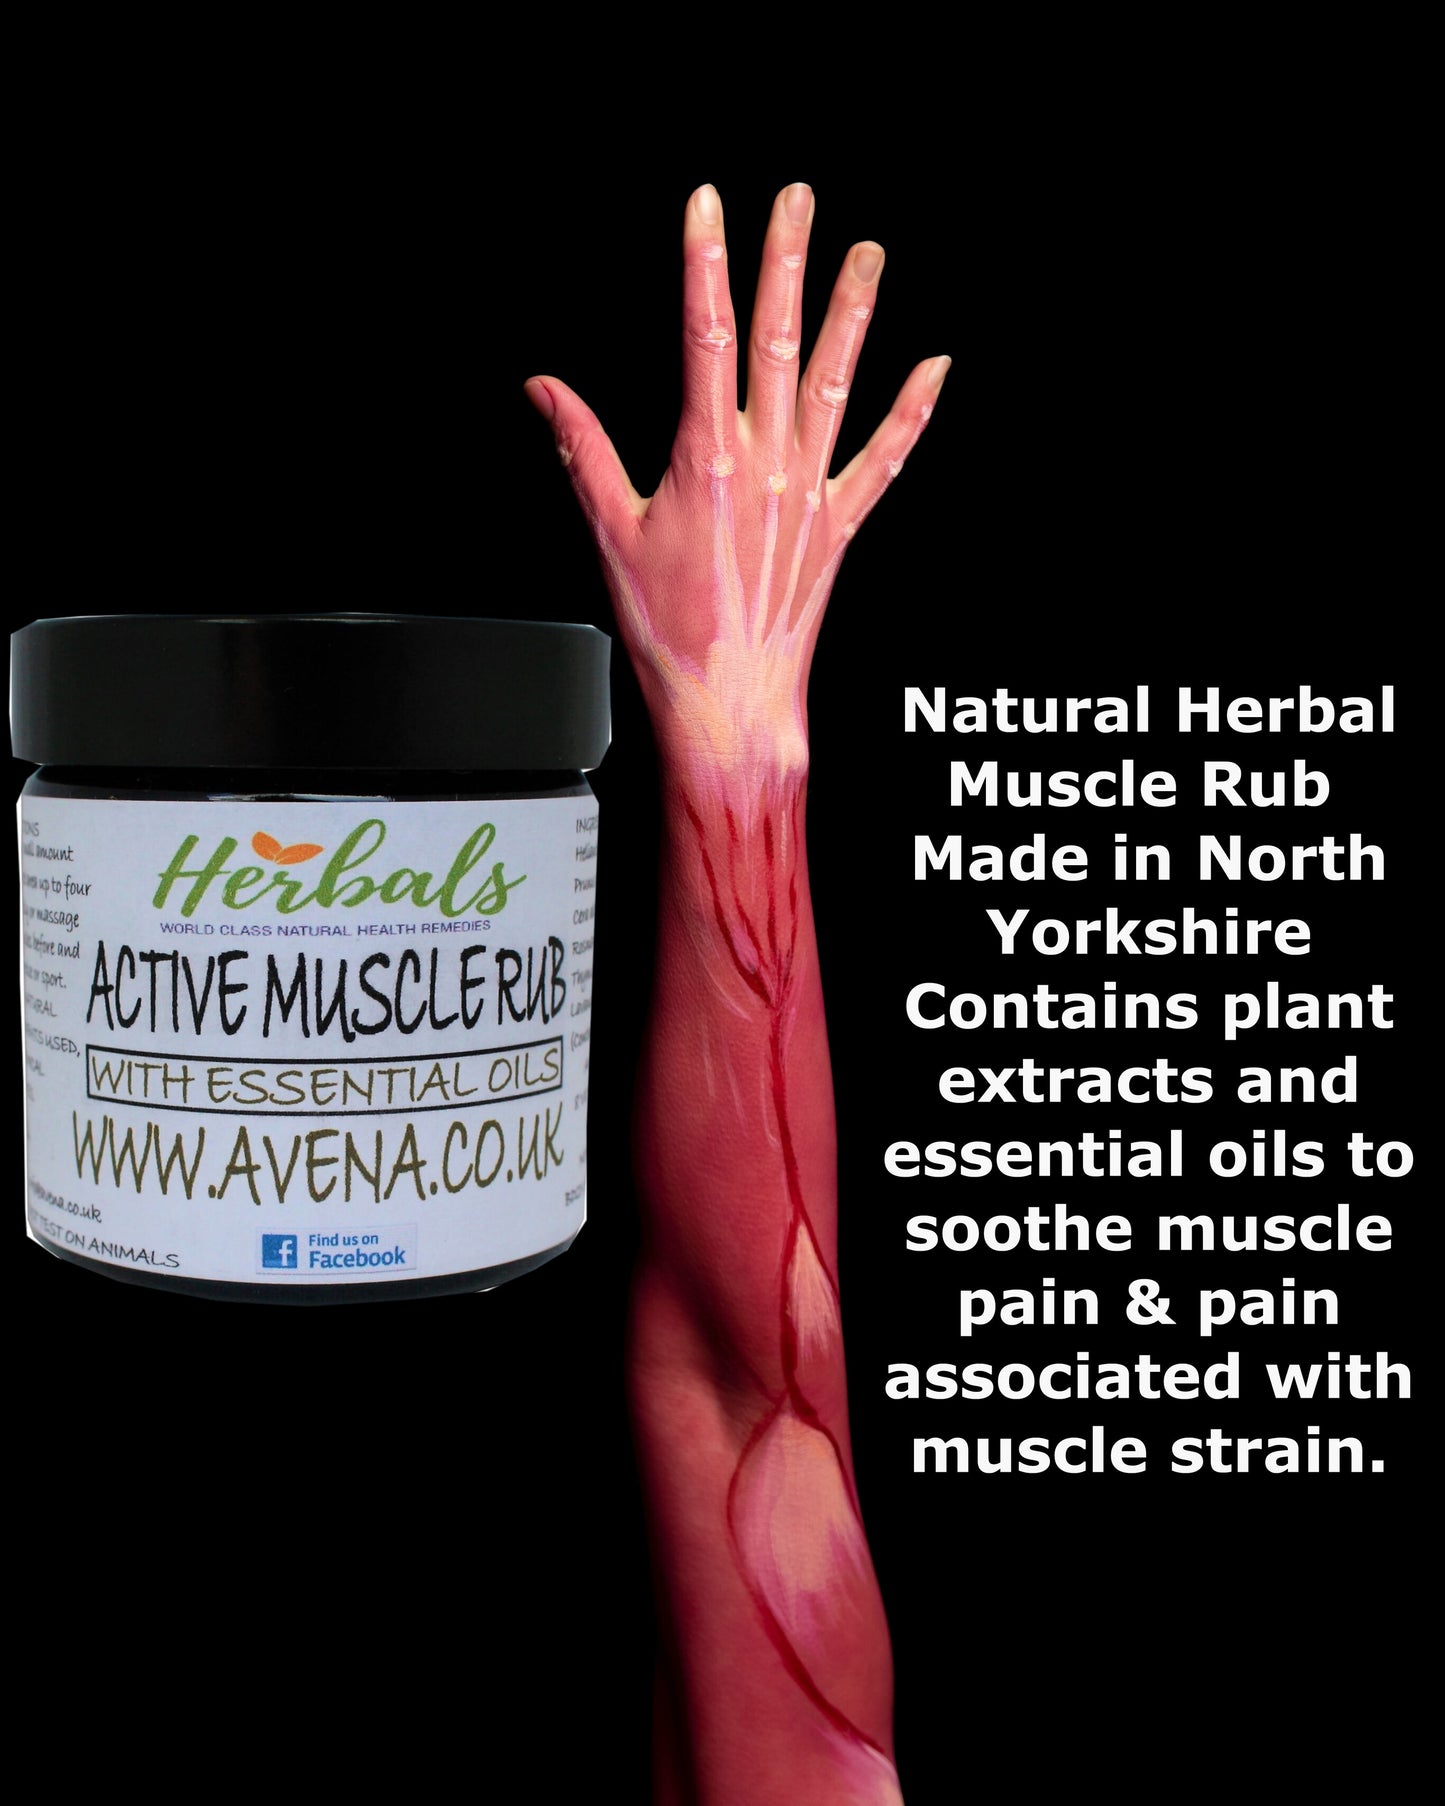 Natural Muscle Rub Herbal Natural Cream For Muscle Aches Pains Strains Tired Pain Ease Repair Strained Muscles